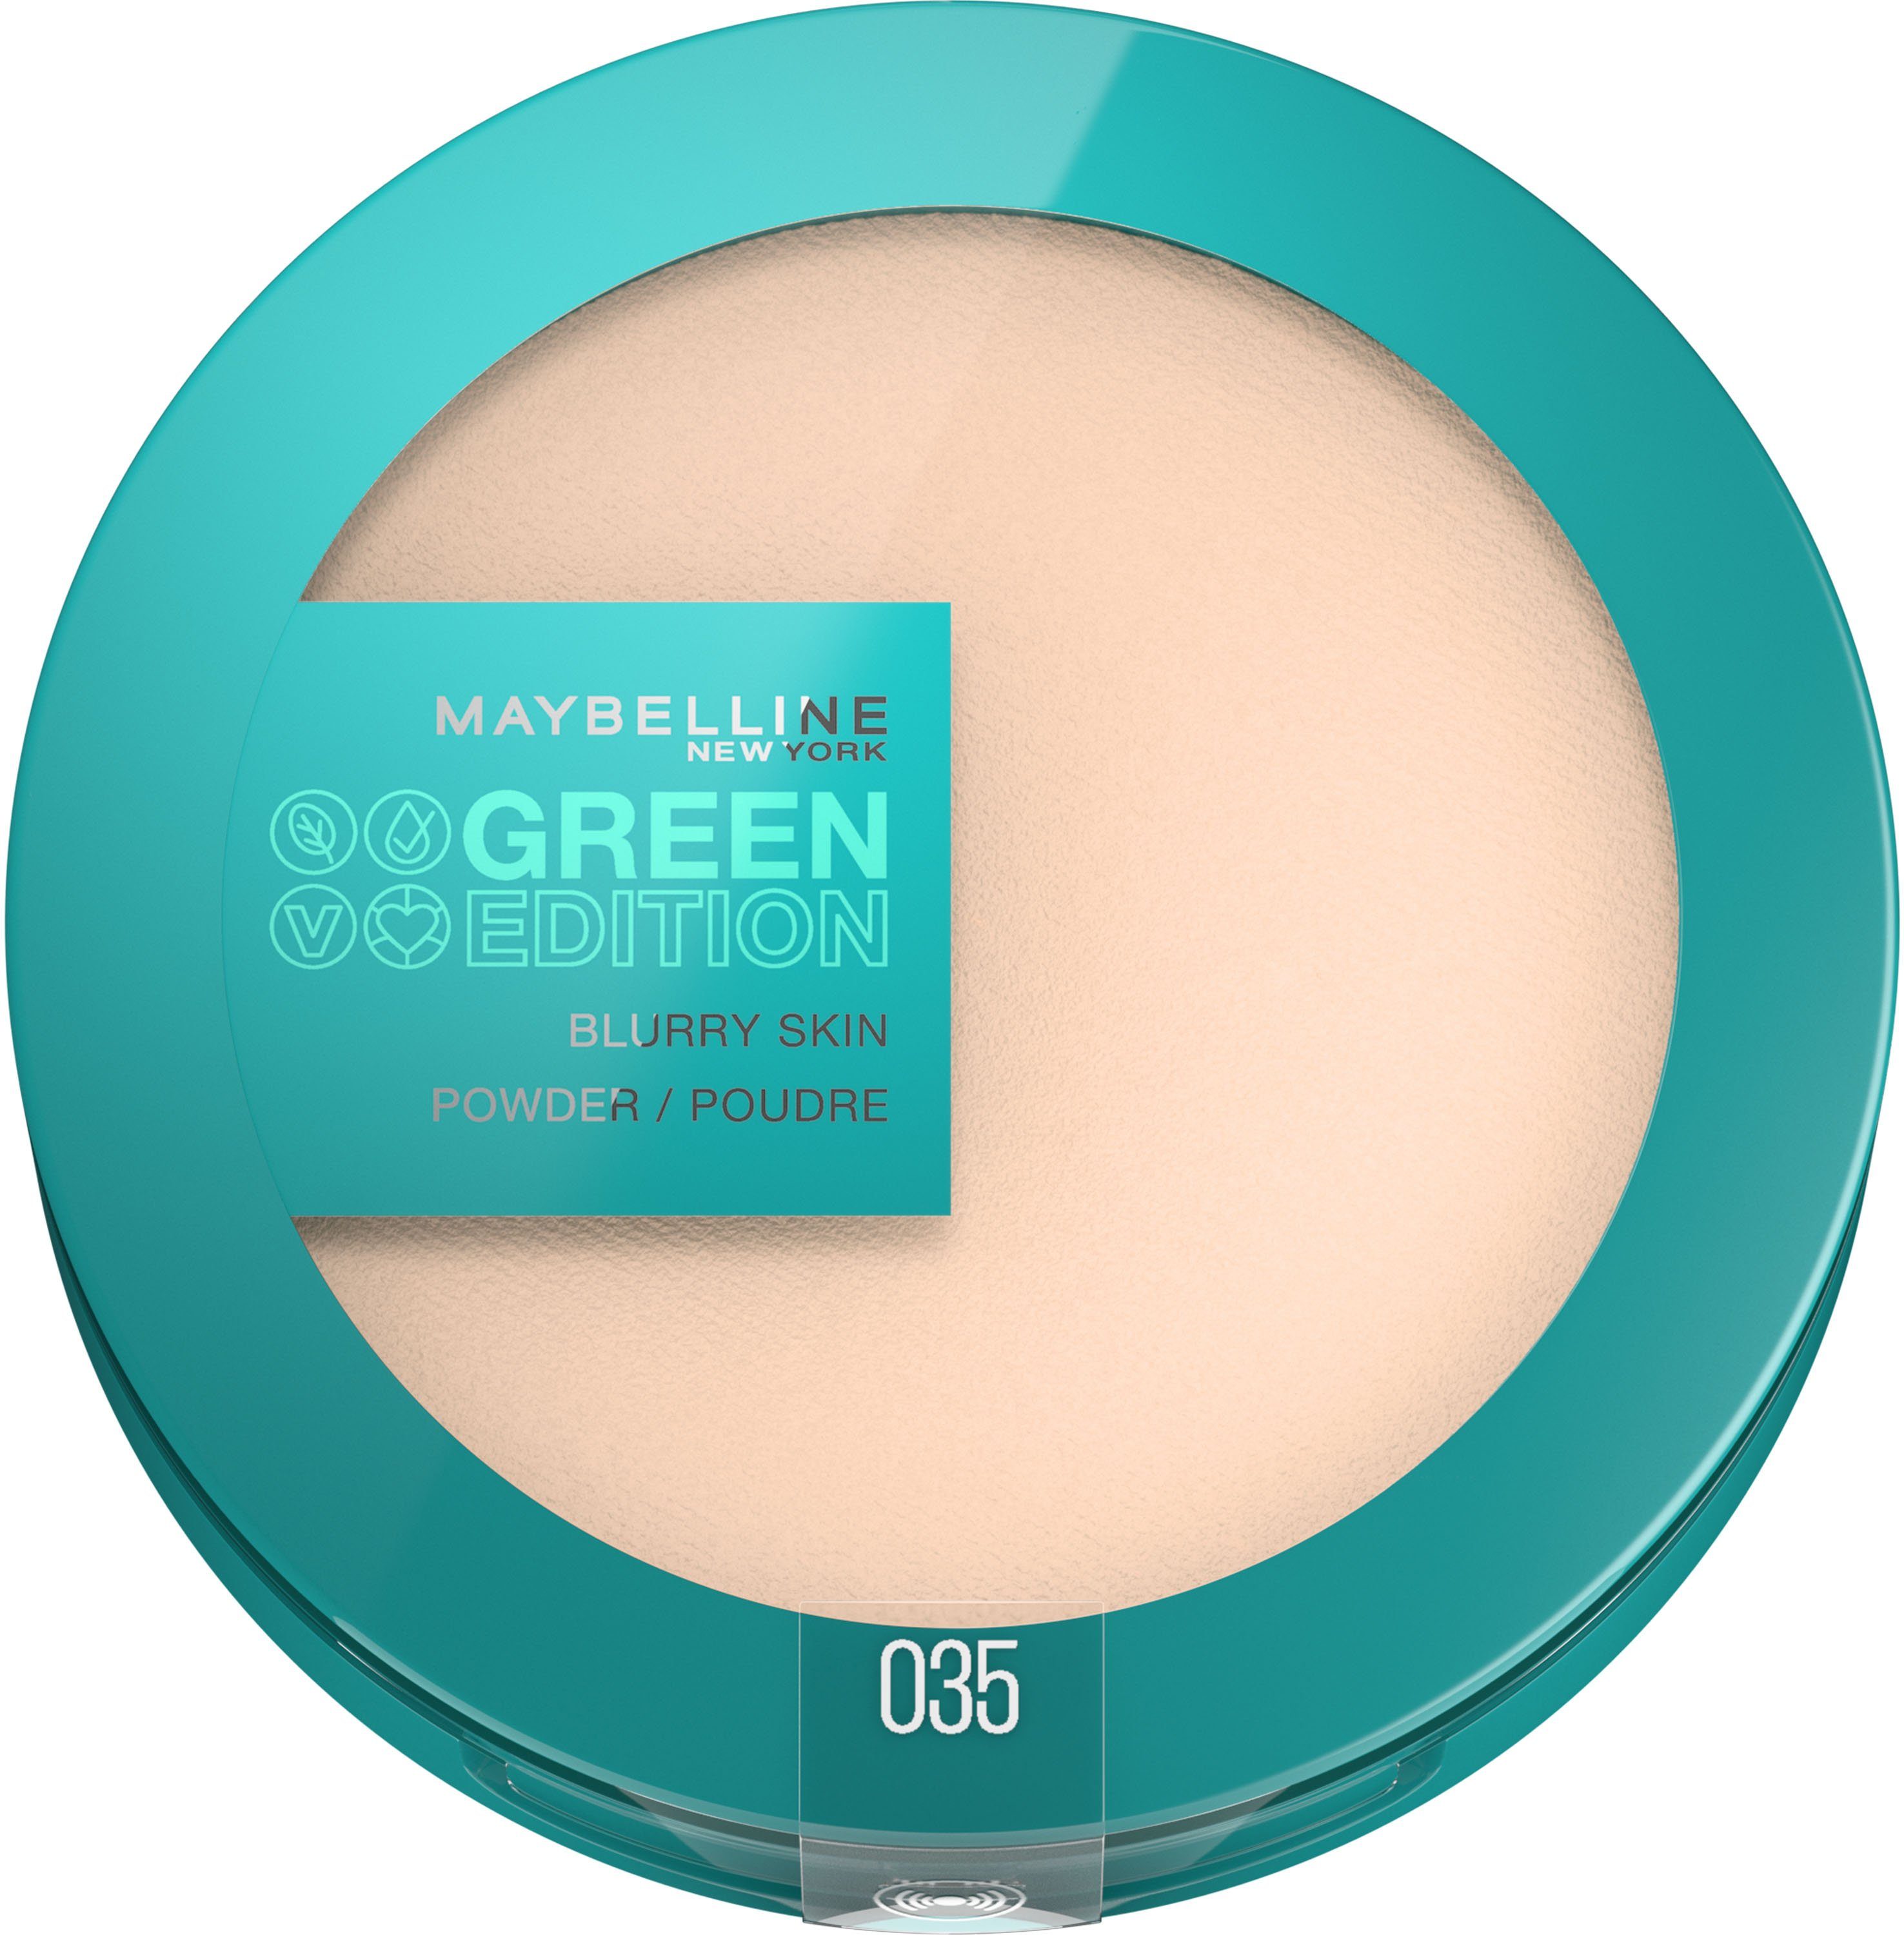 Puder 35 MAYBELLINE ED NEW YORK Green GREEN Puder Edition POWDER